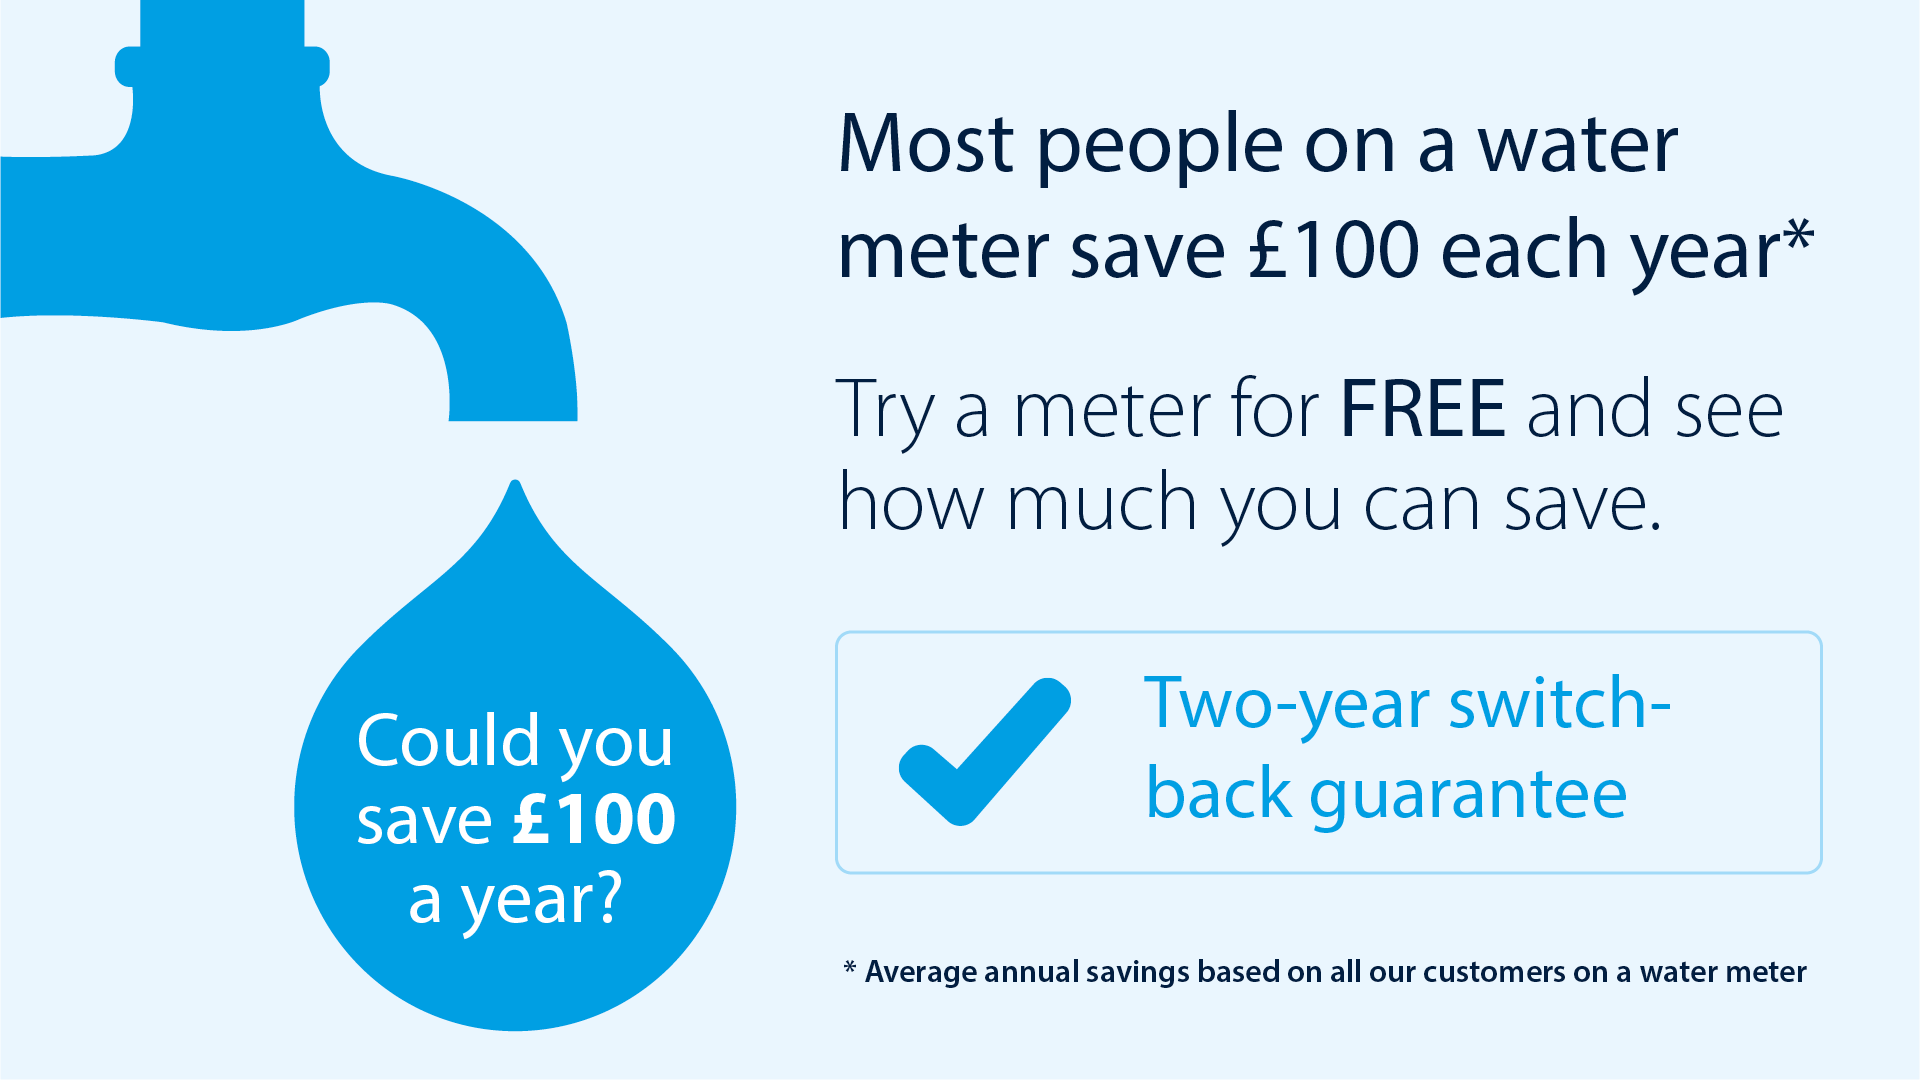 Graphic stating "Most people on a water meter save £100 each year"